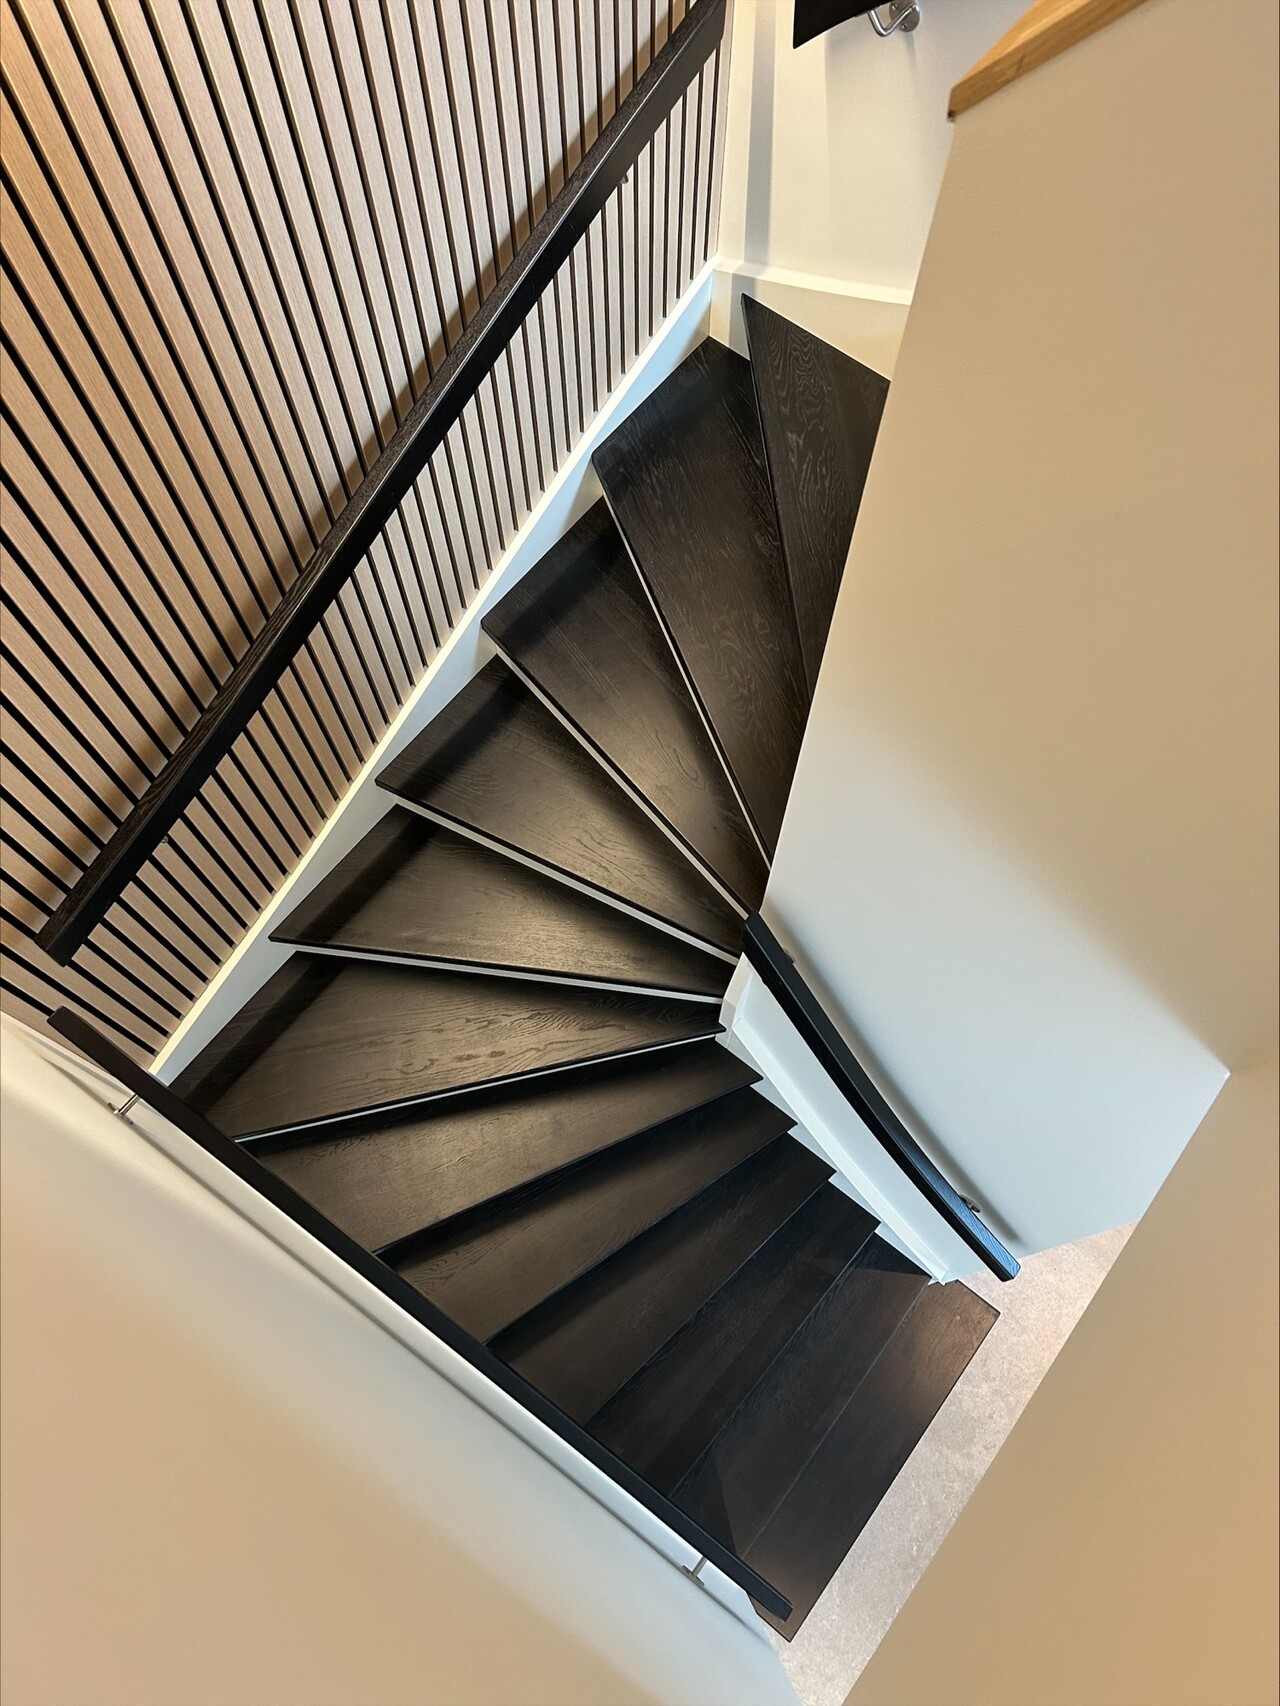 21. U-shaped staircase made of oak stained black